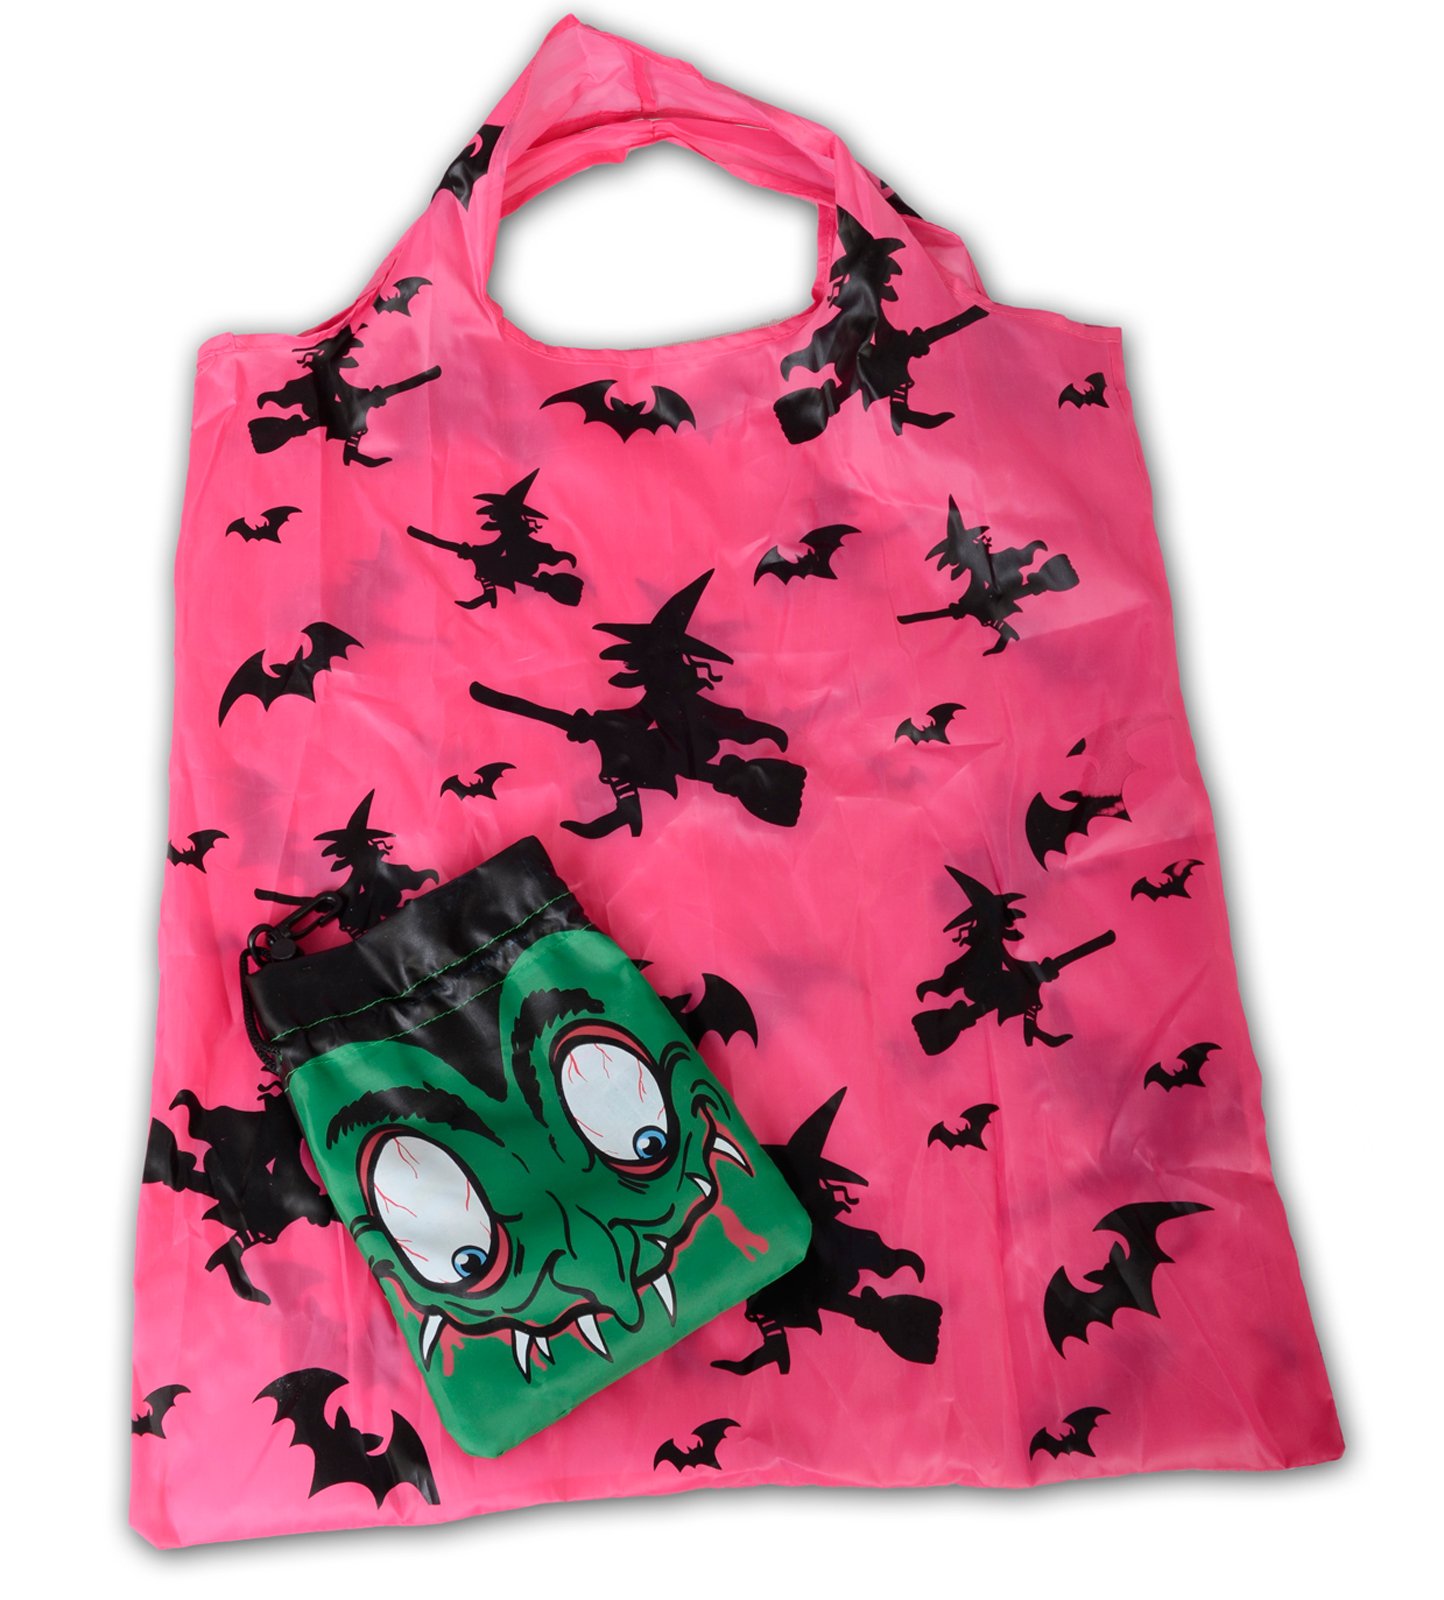 Witch Bag In A Bag - Click Image to Close